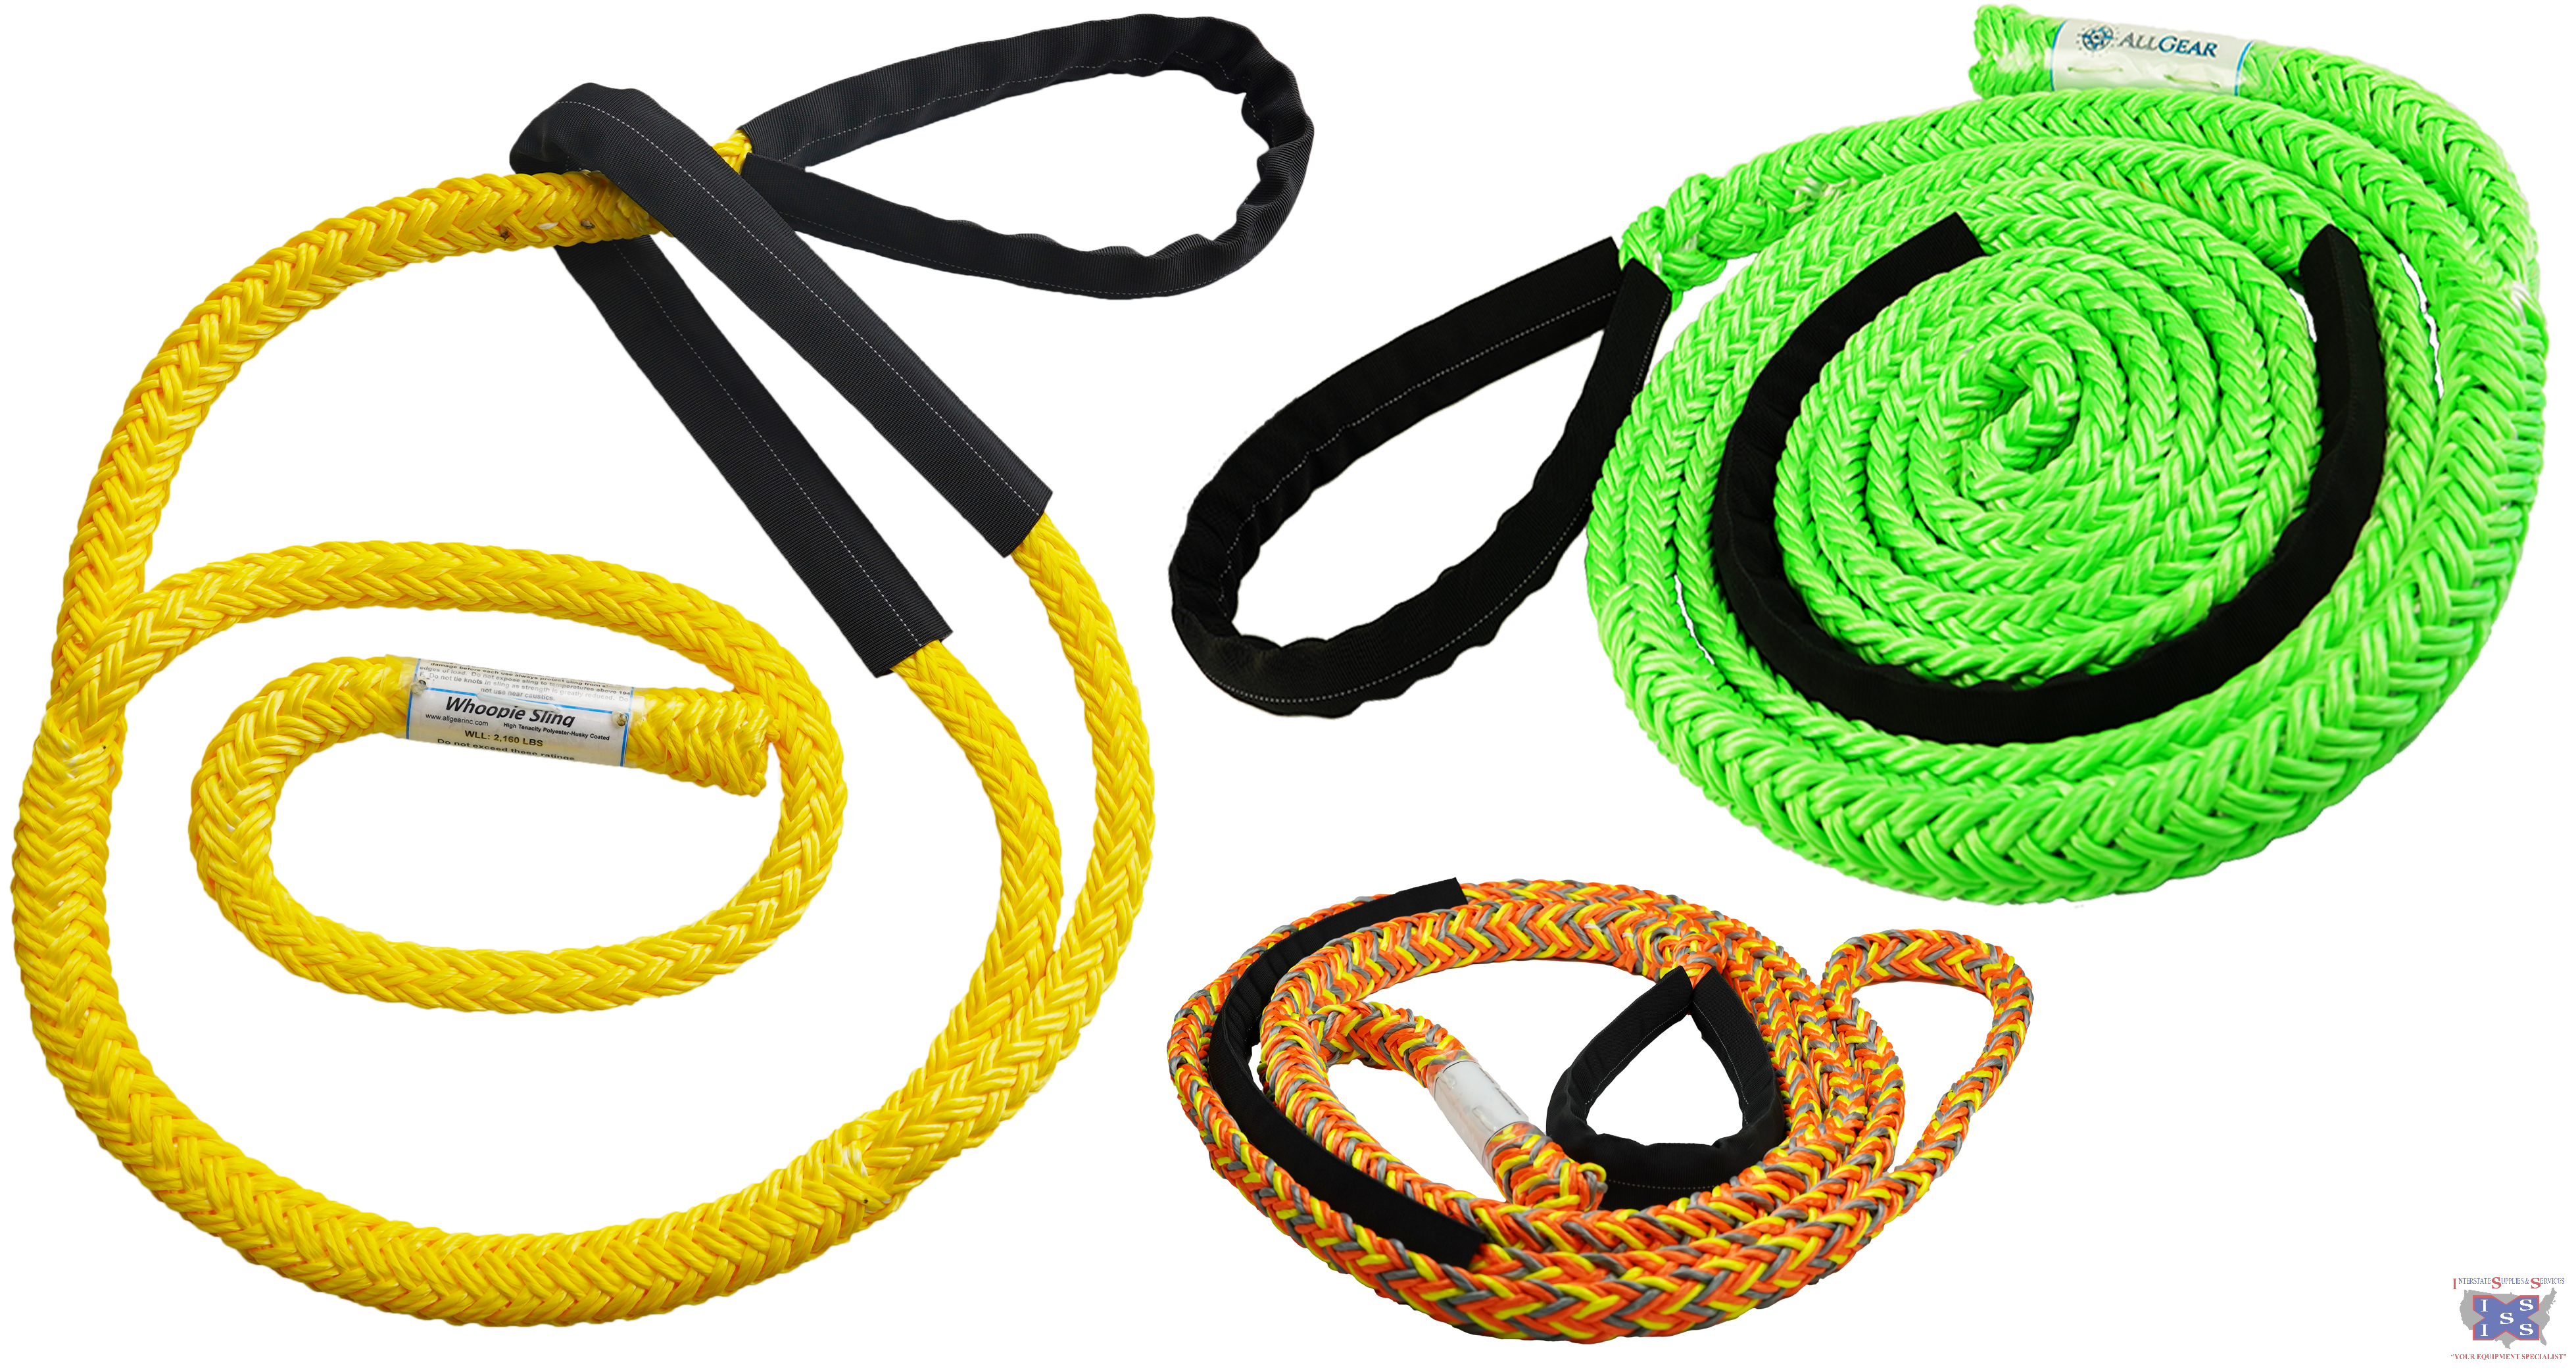 AllGear Adjustable Husky-12 Whoopie Sling 5/8" x 3-7' - Click Image to Close